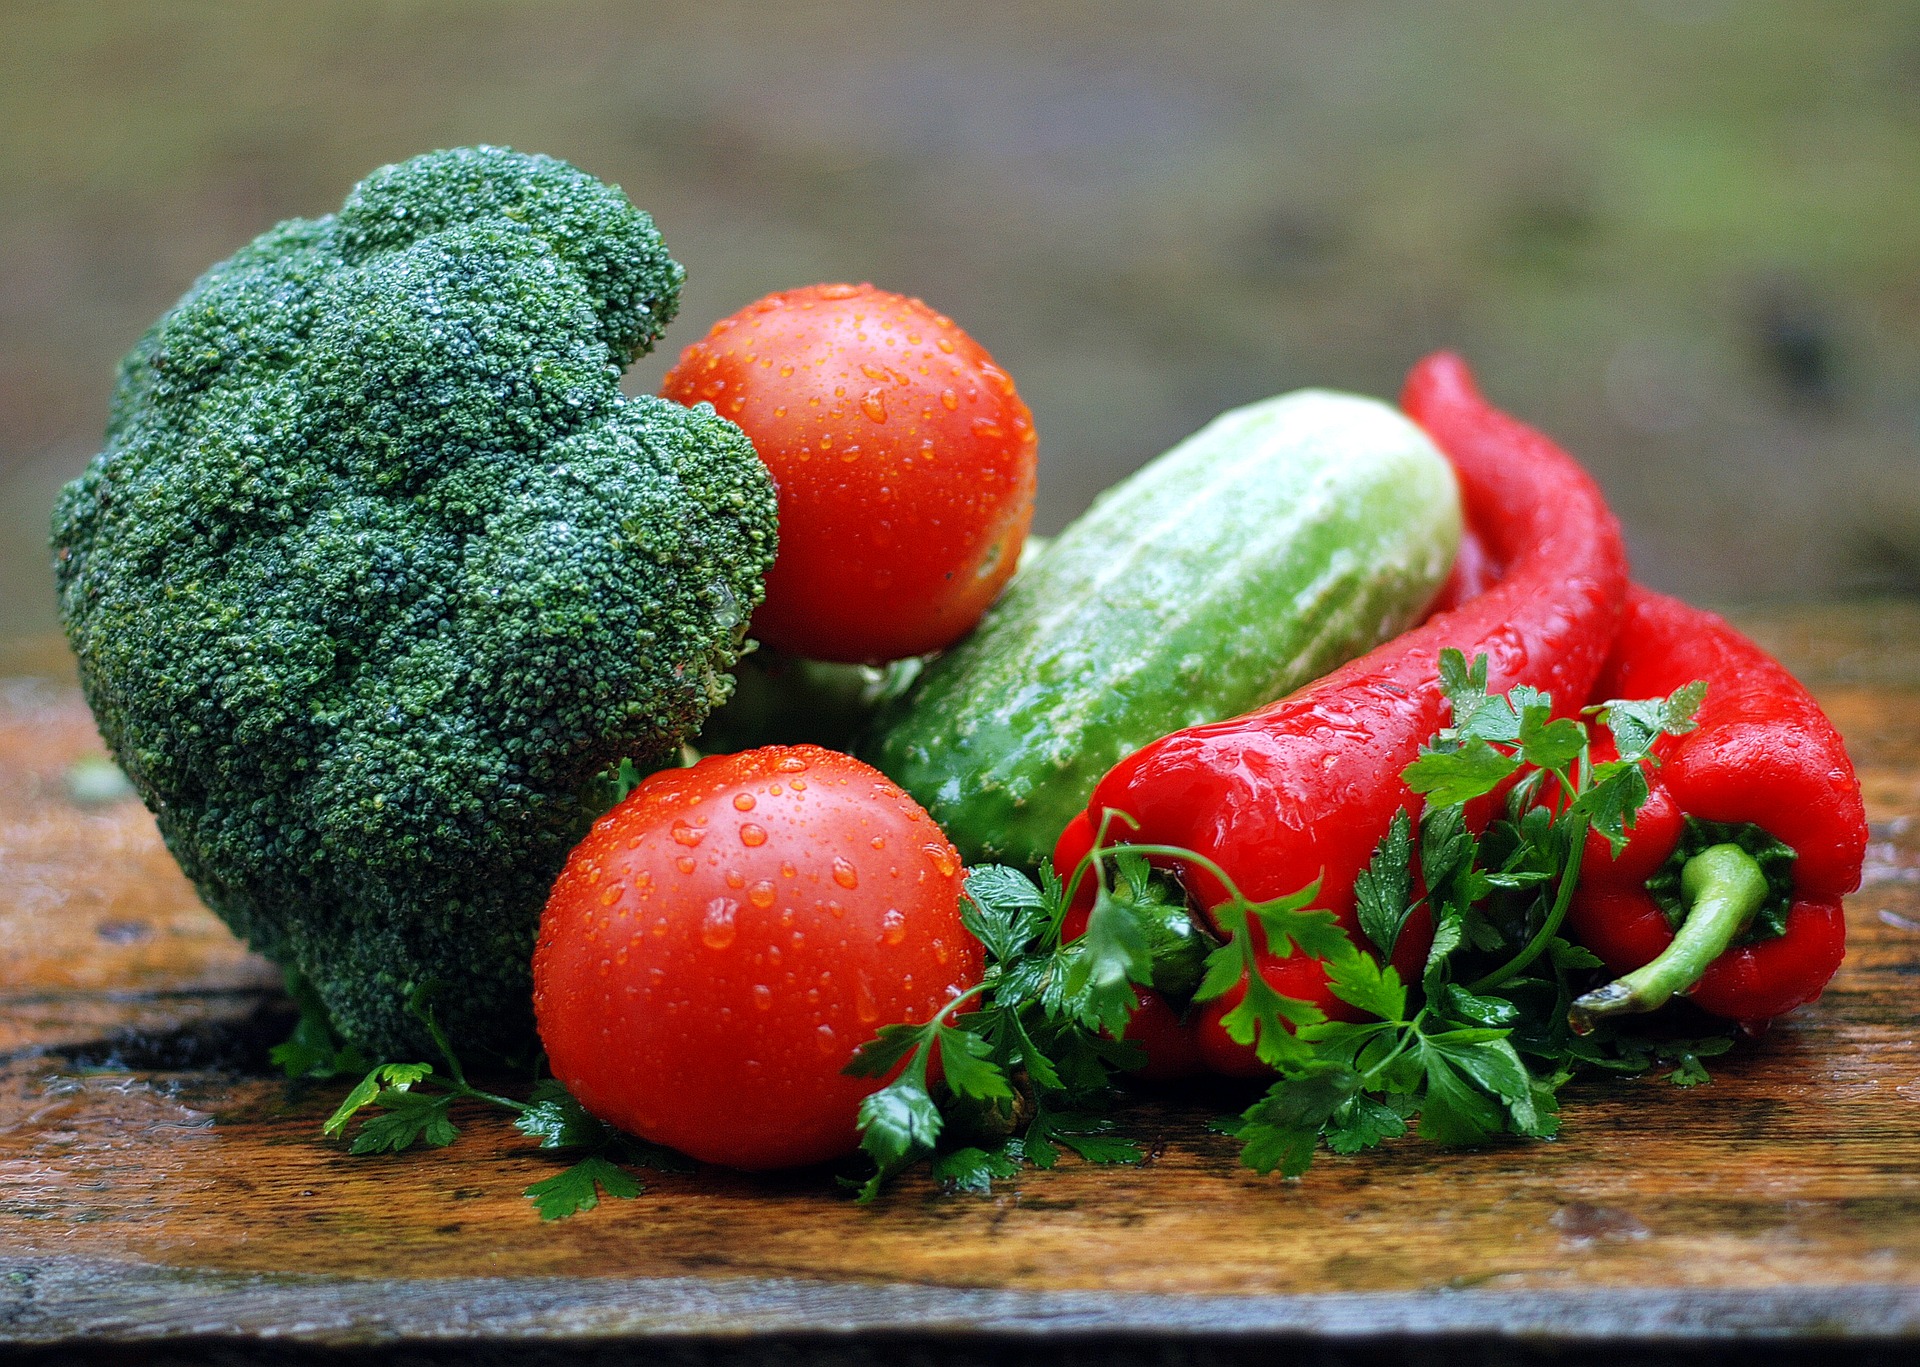 Eat well and save money - a range of vegetables on a wooden board